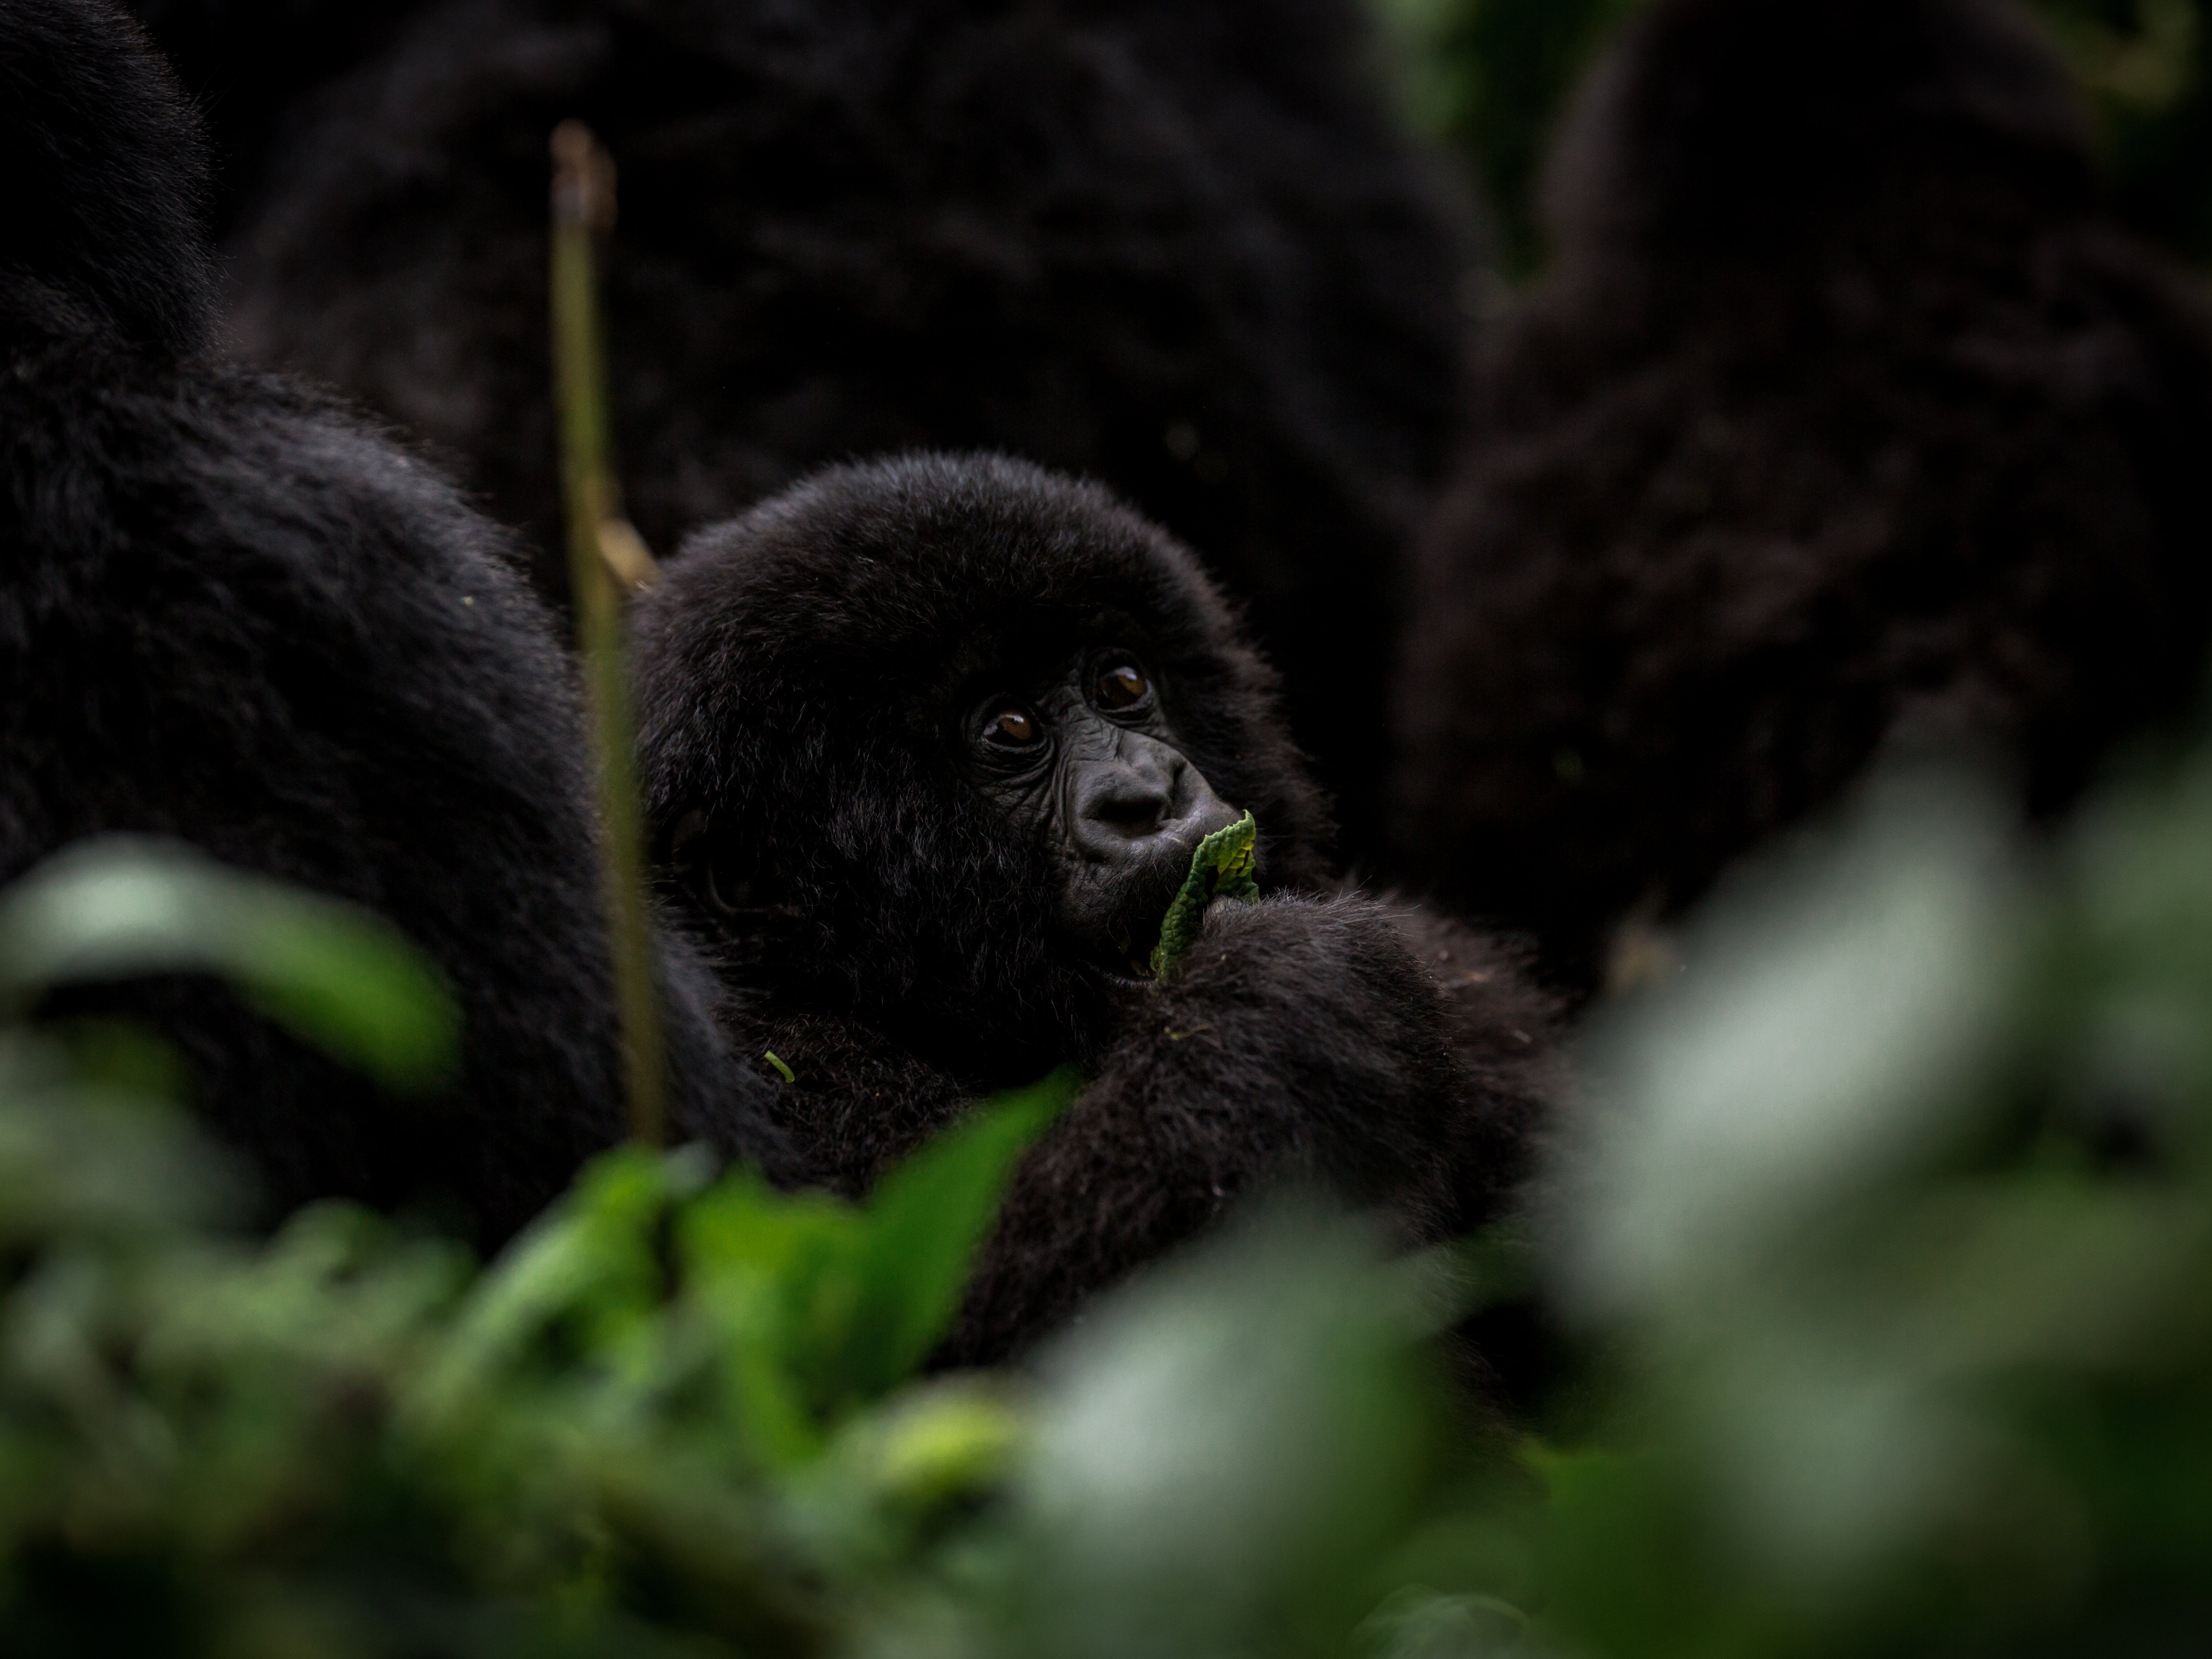 Rwanda is a true conservation success story, having more than doubled the gorilla population